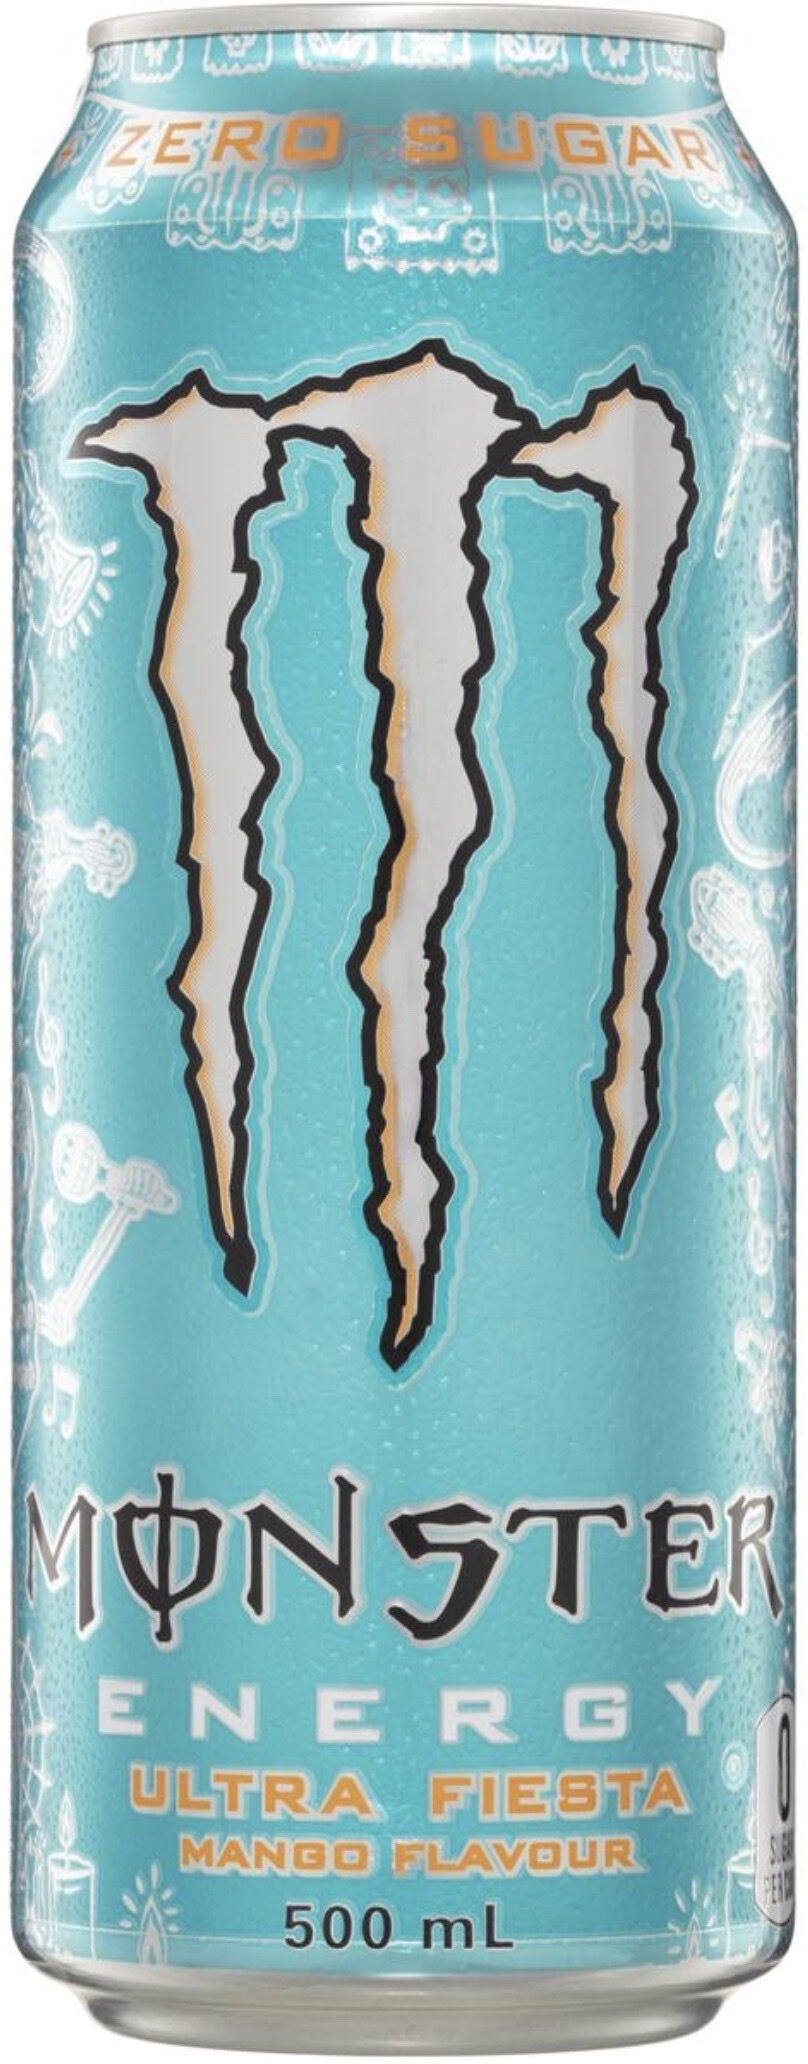 Monster Energy Ultra Fiesta Mango Flavour - Product